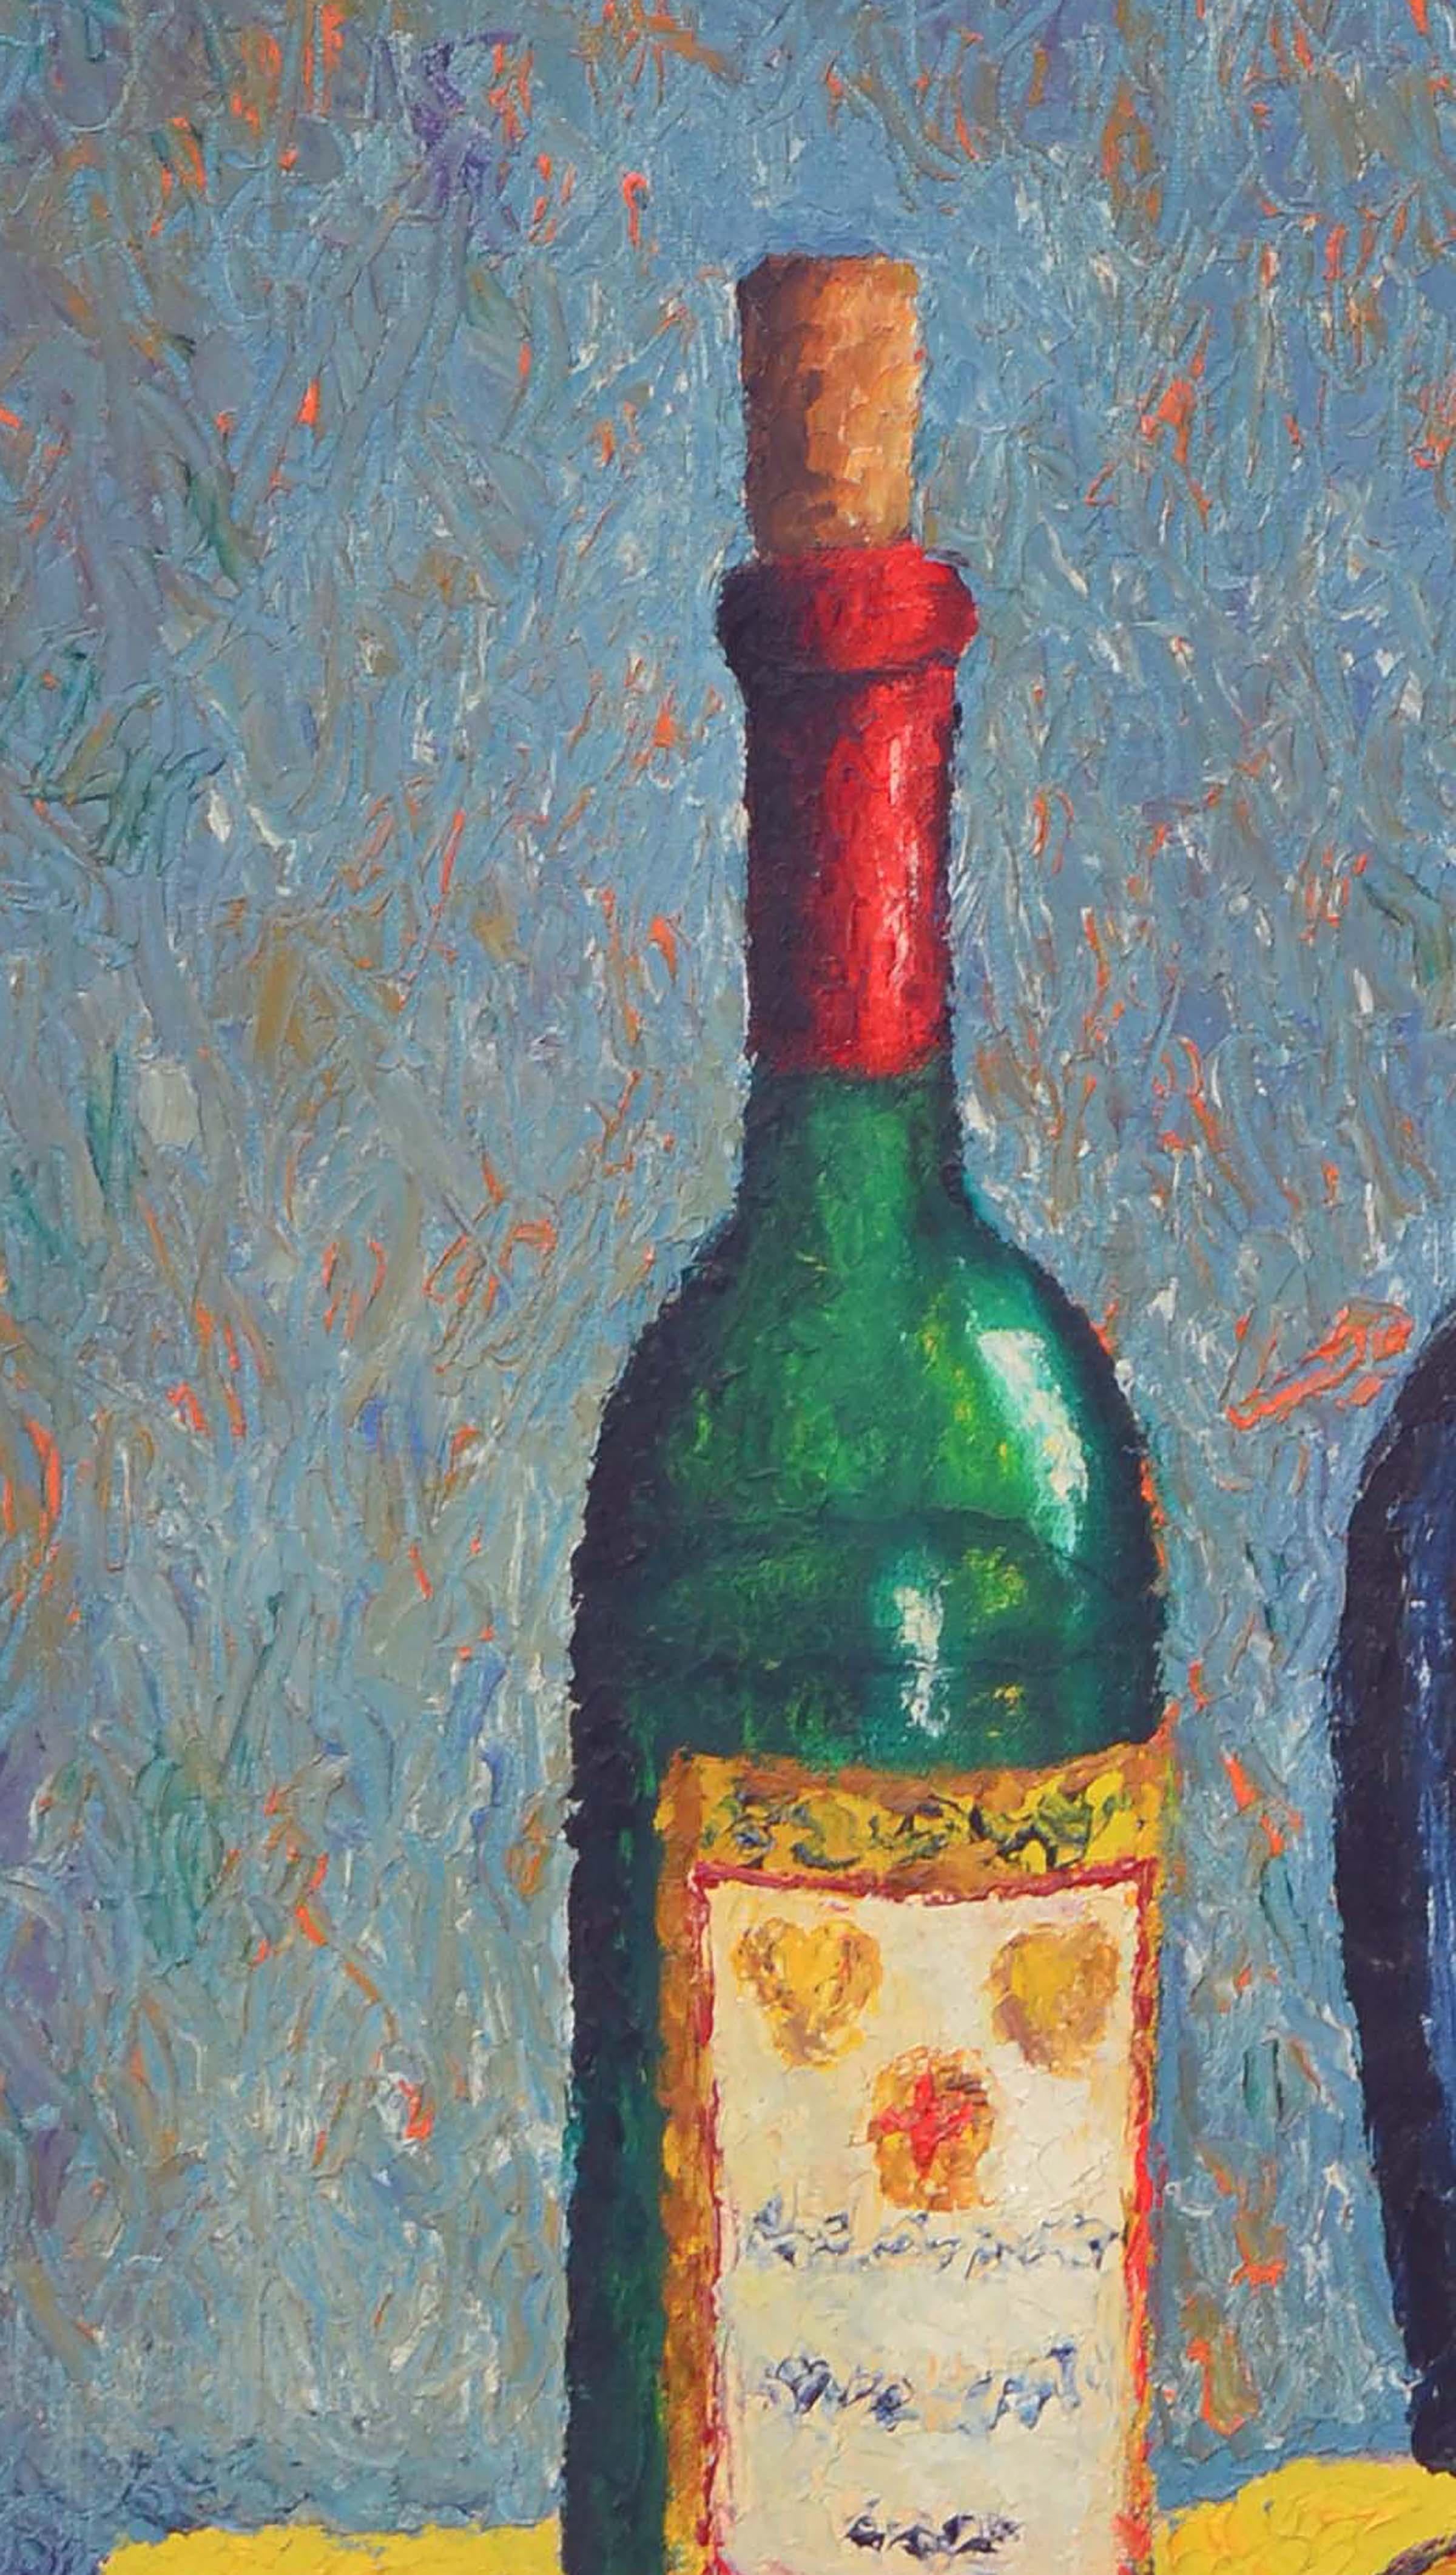 Apple & Wine Bottle Vibrant Contemporary Still-Life  - American Impressionist Painting by E. Star